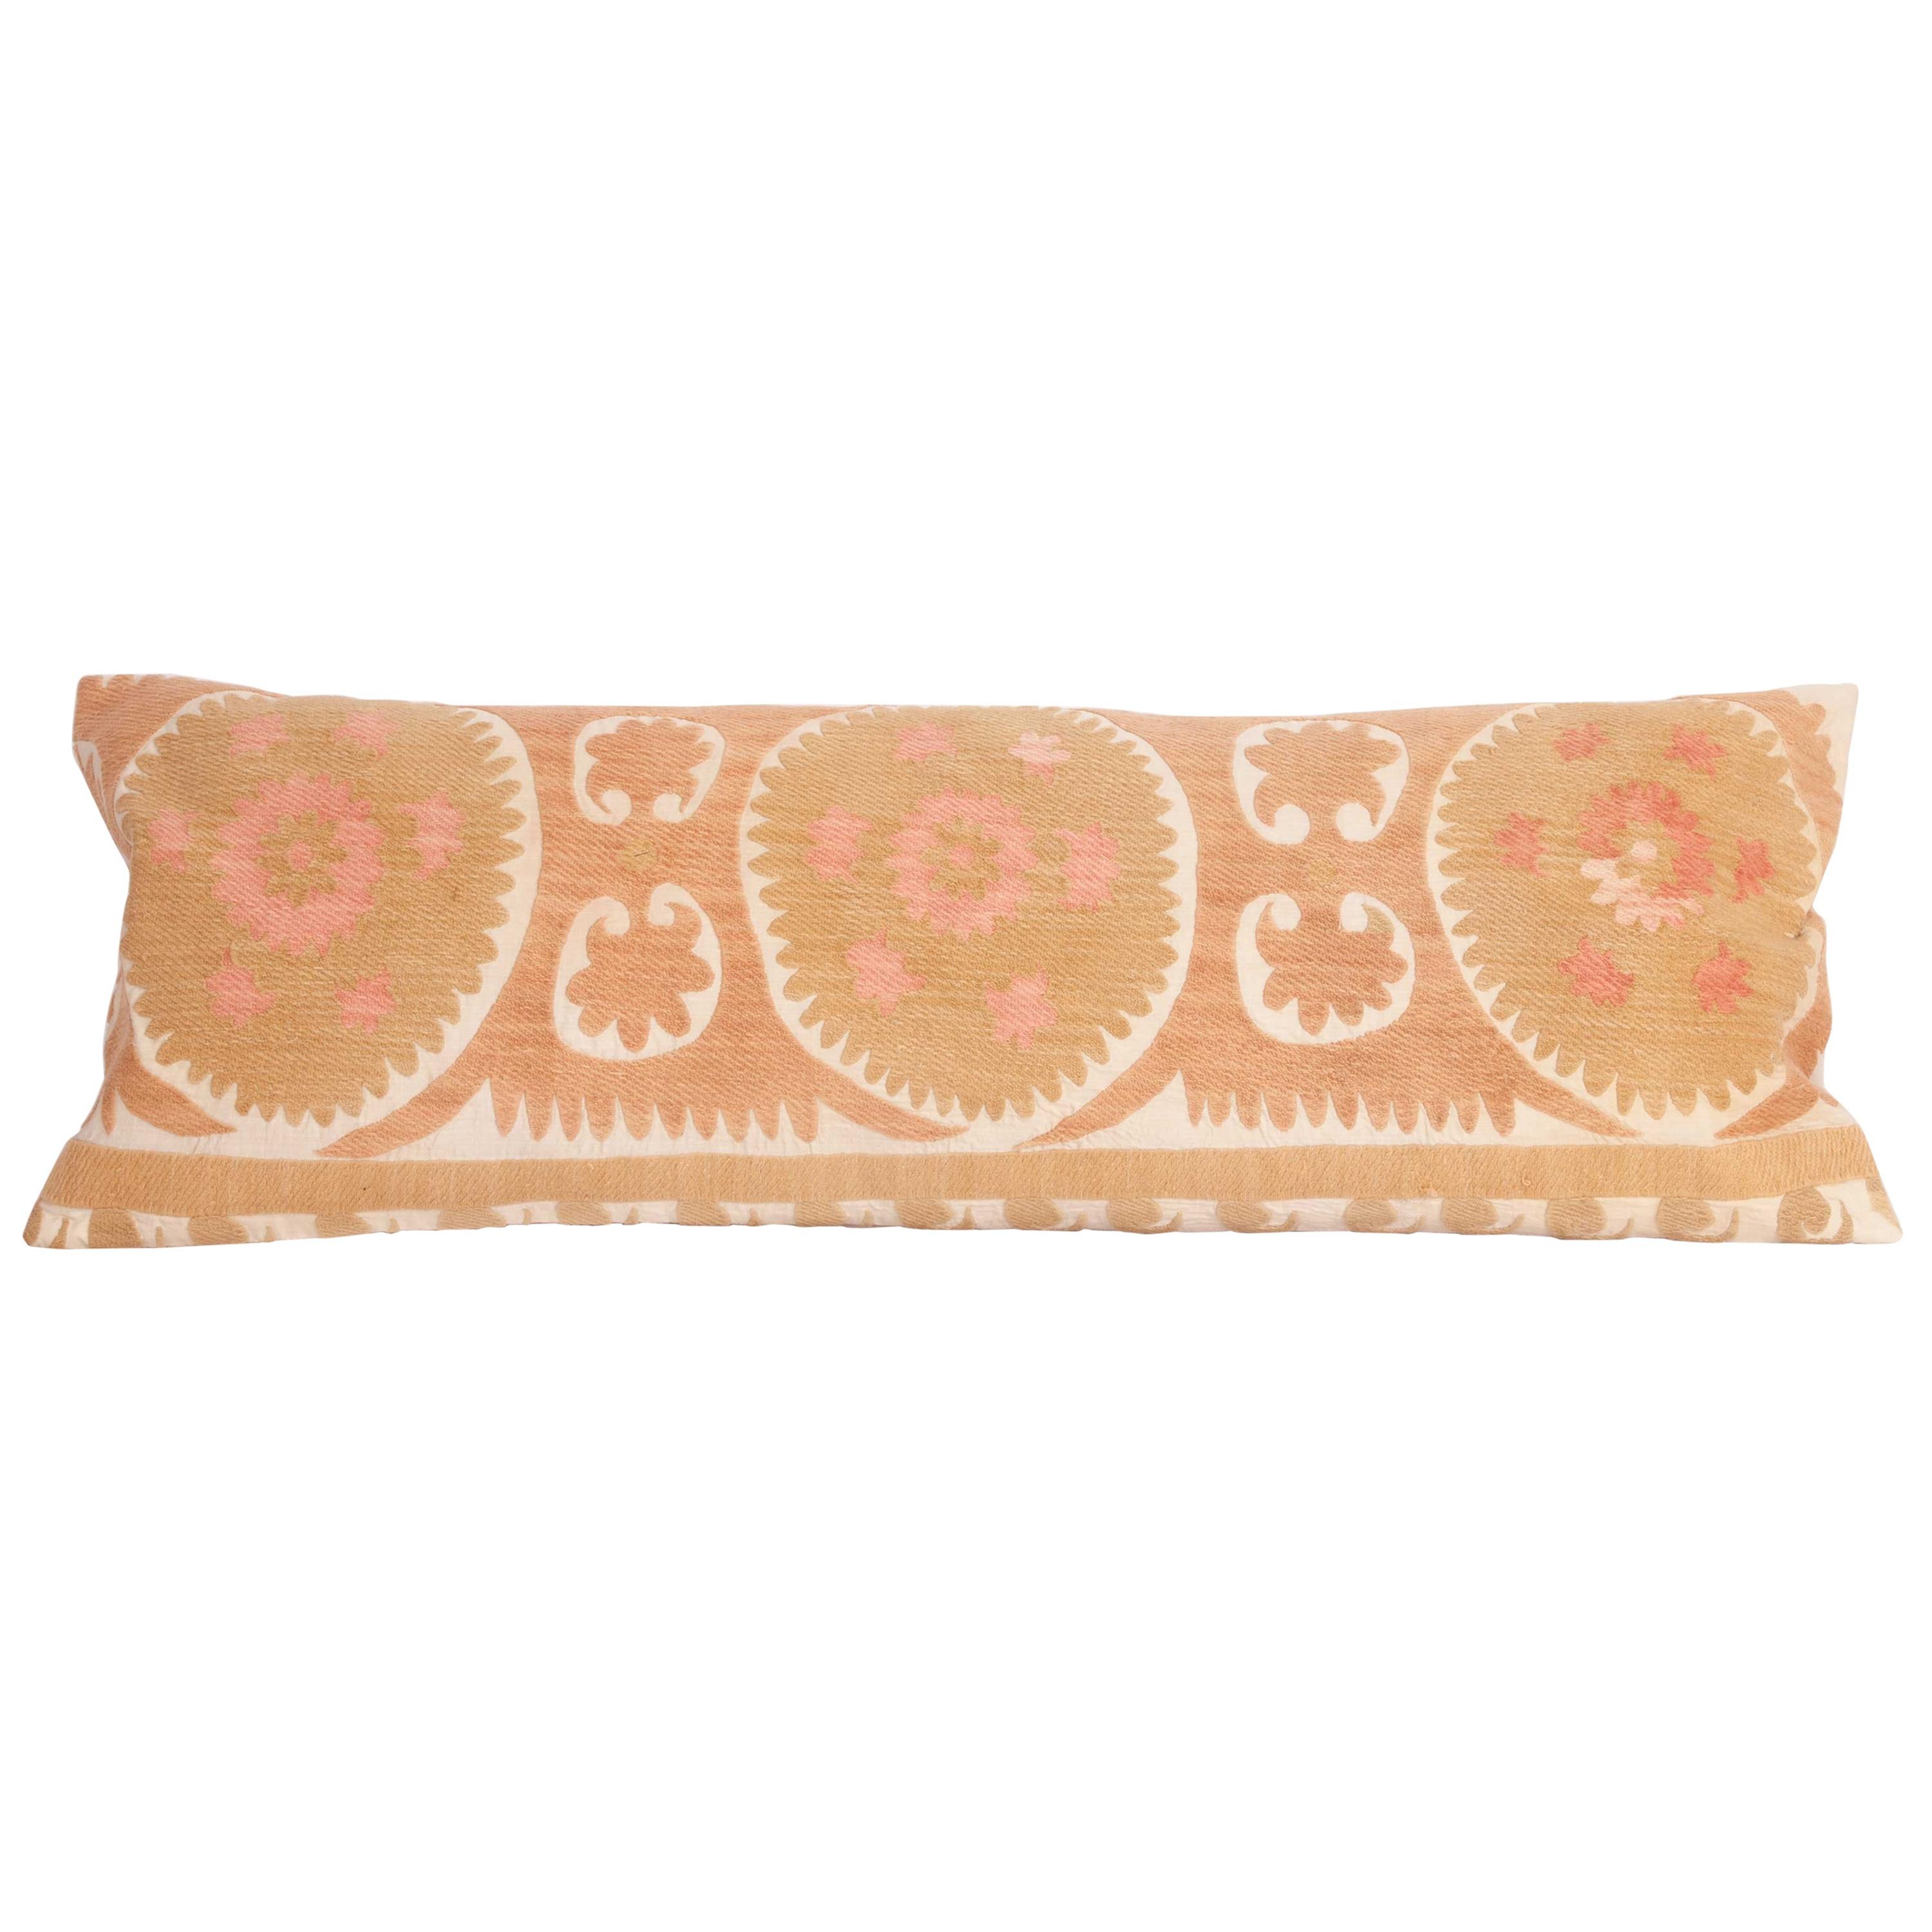 Suzani Lumbar Pillow Case Made from a Vintage Uzbek Suzani, Mid-20th Century For Sale